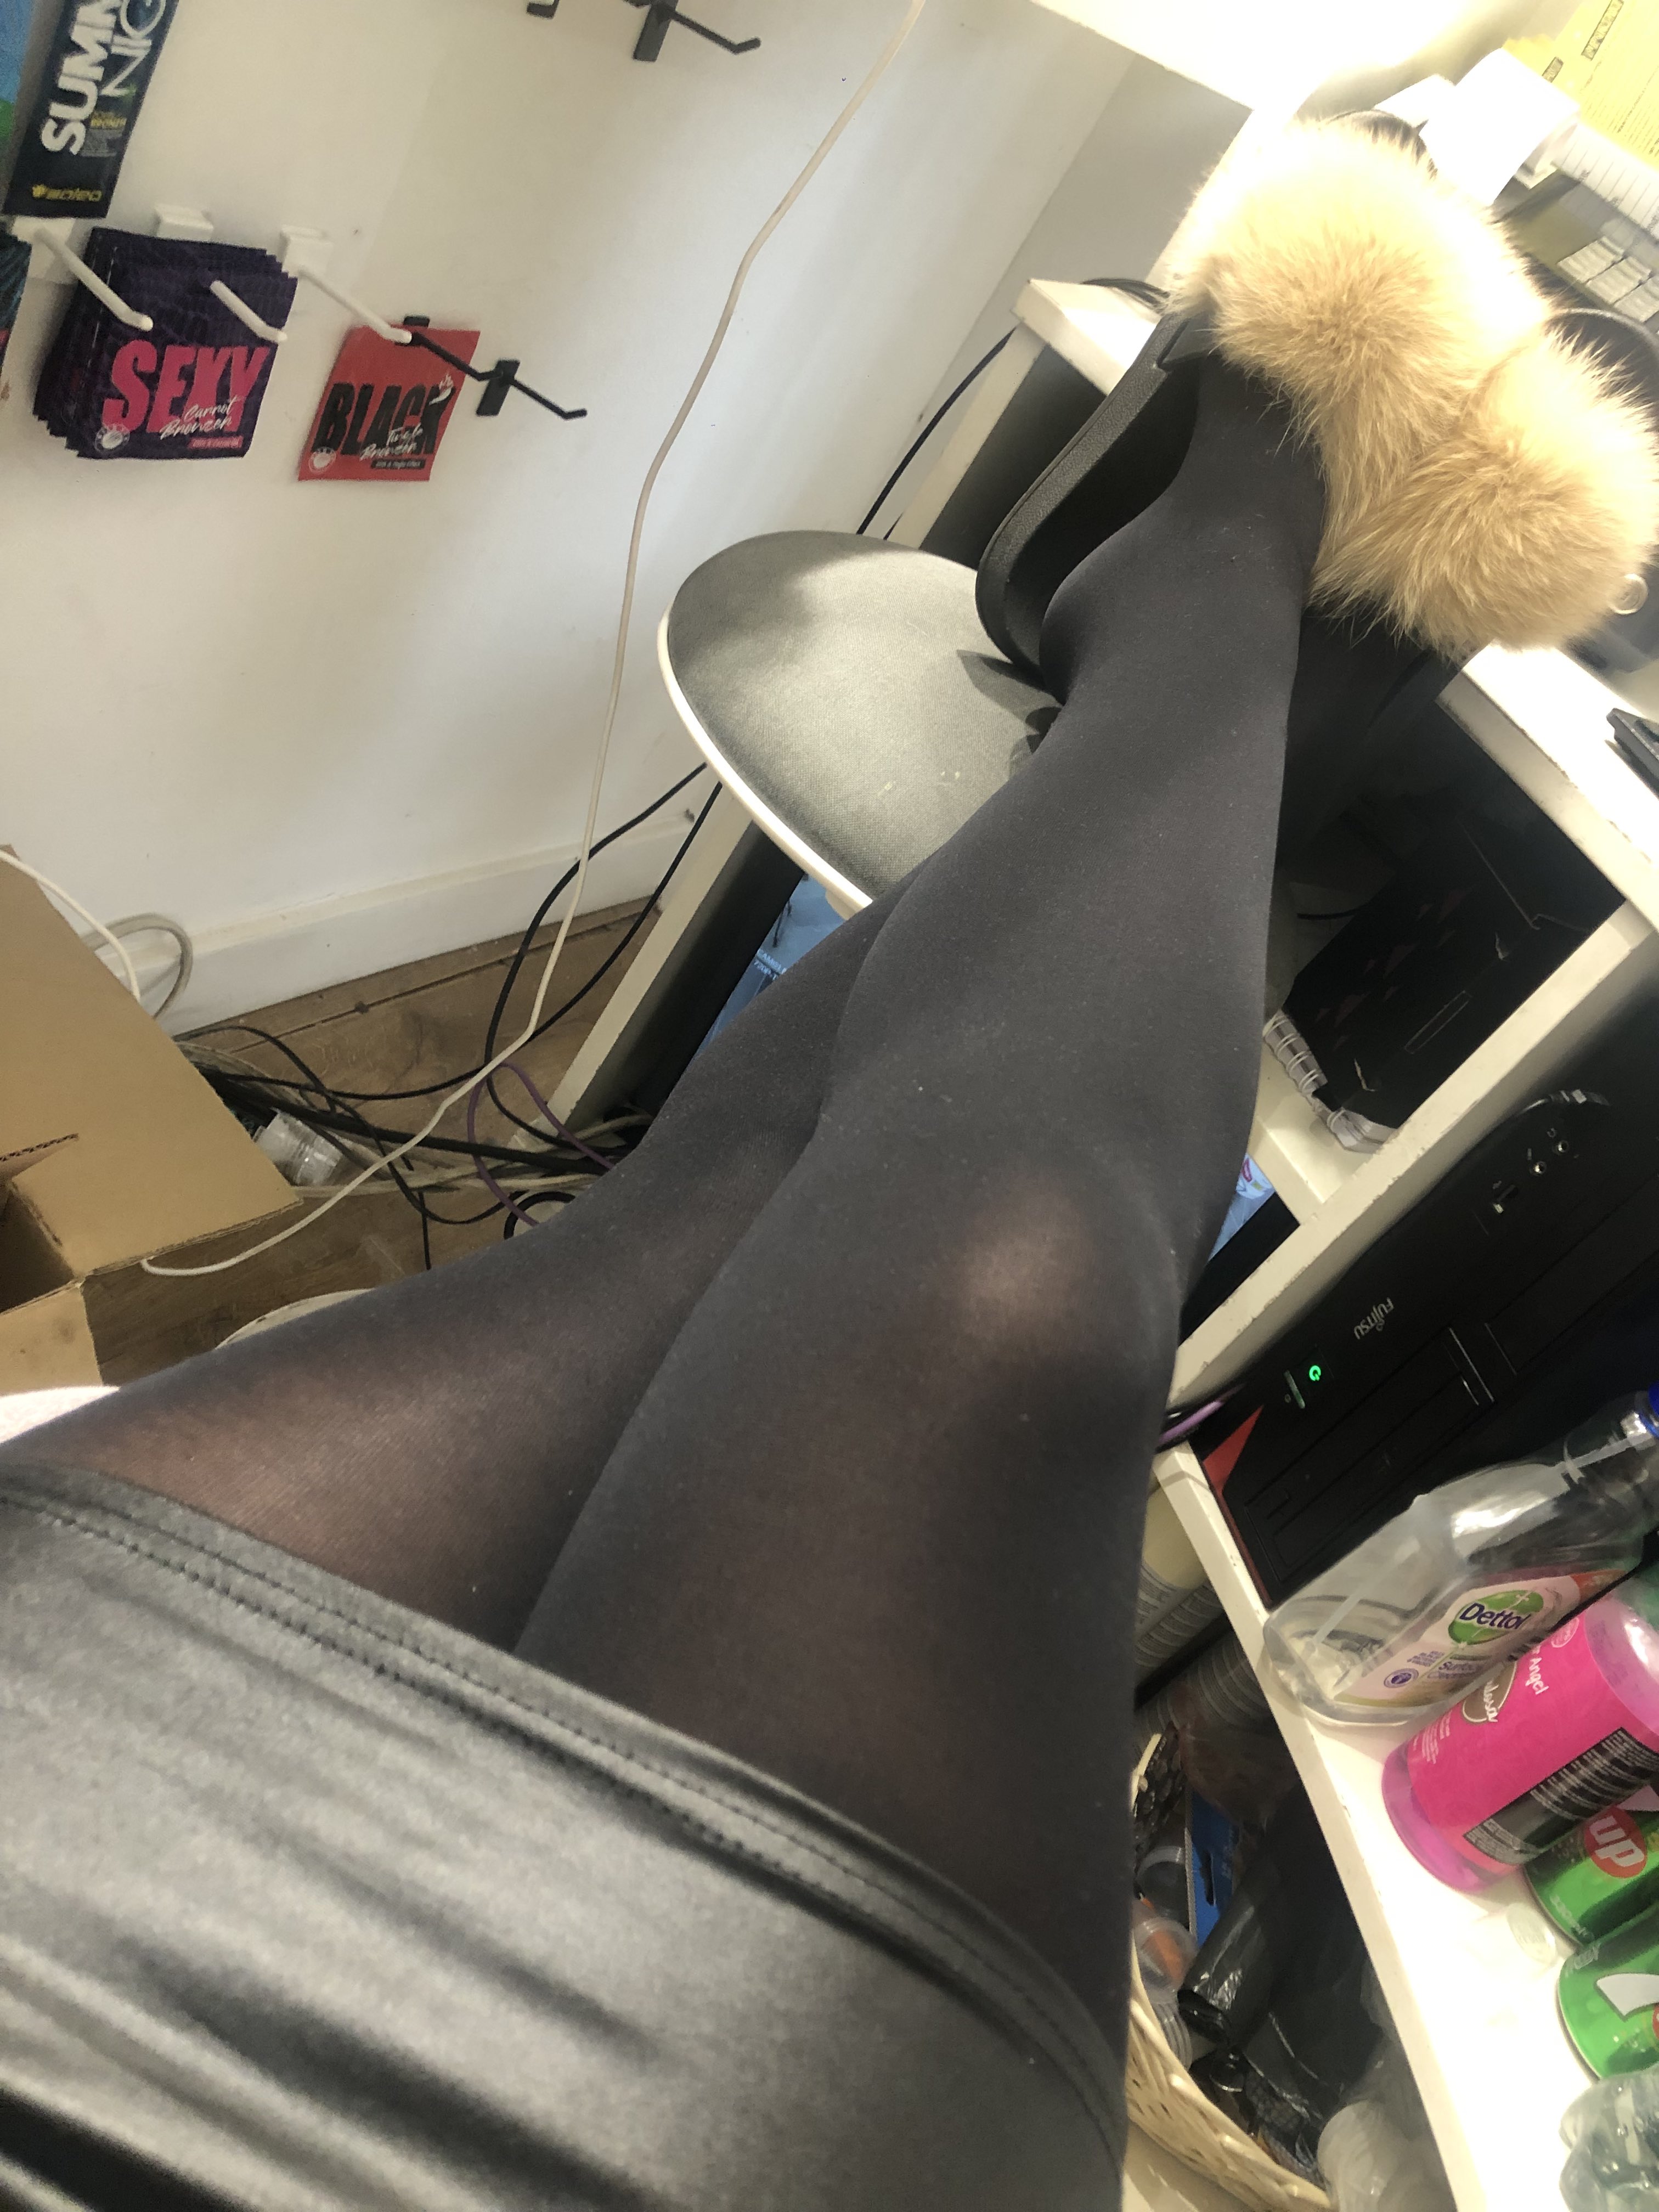 ✯𝓜εℛcε∂εs✯ 💫 on X: The thick black tights are out! Slightly chilly now  for bare legs 🥶  / X